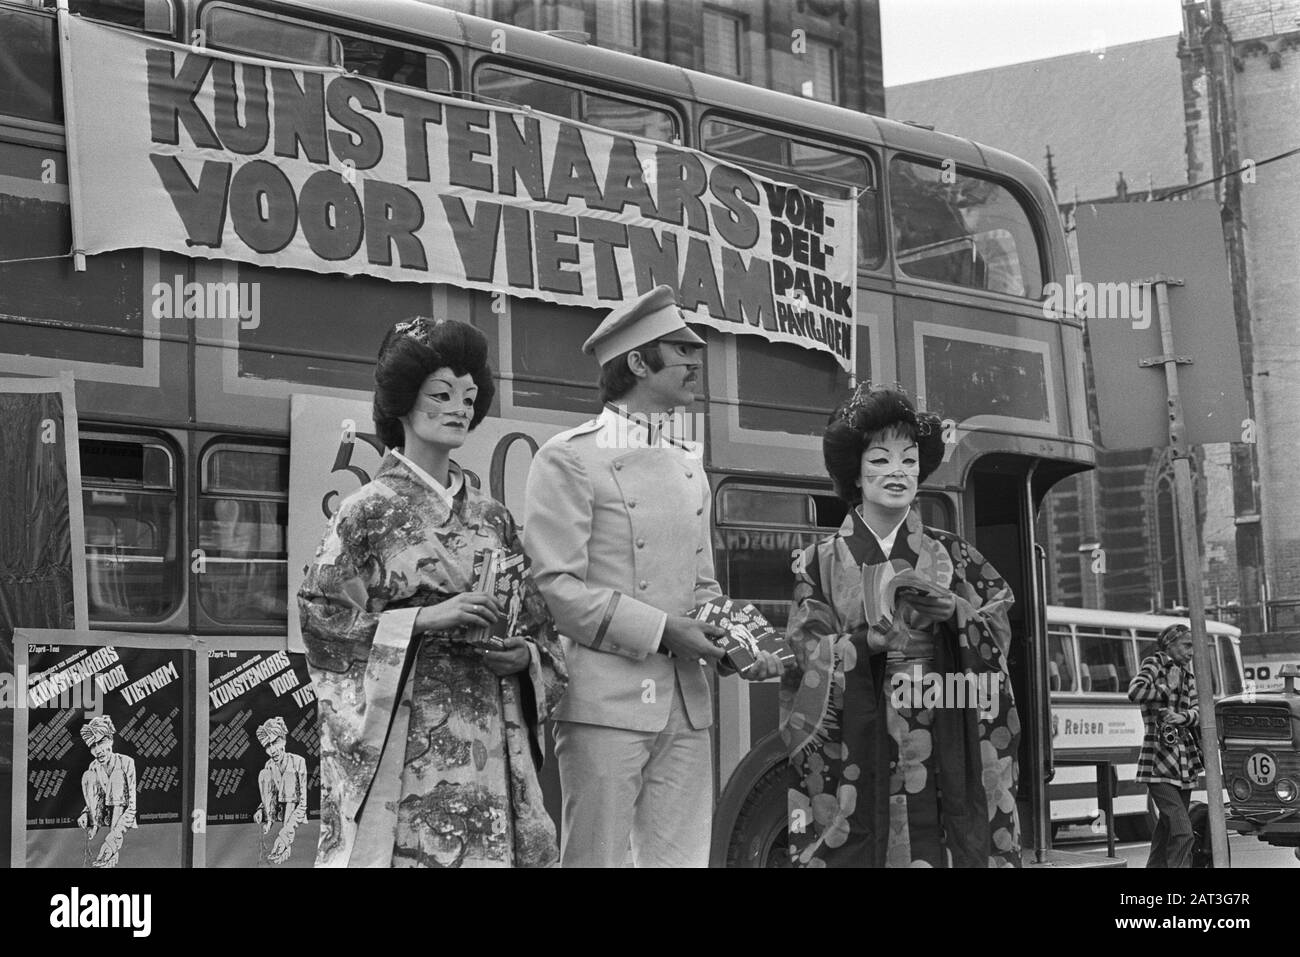 Holland Festival for Vietnam, figures from Soldier Tauaka by bus Date: April 27, 1973 Keywords: FESTIVES Stock Photo